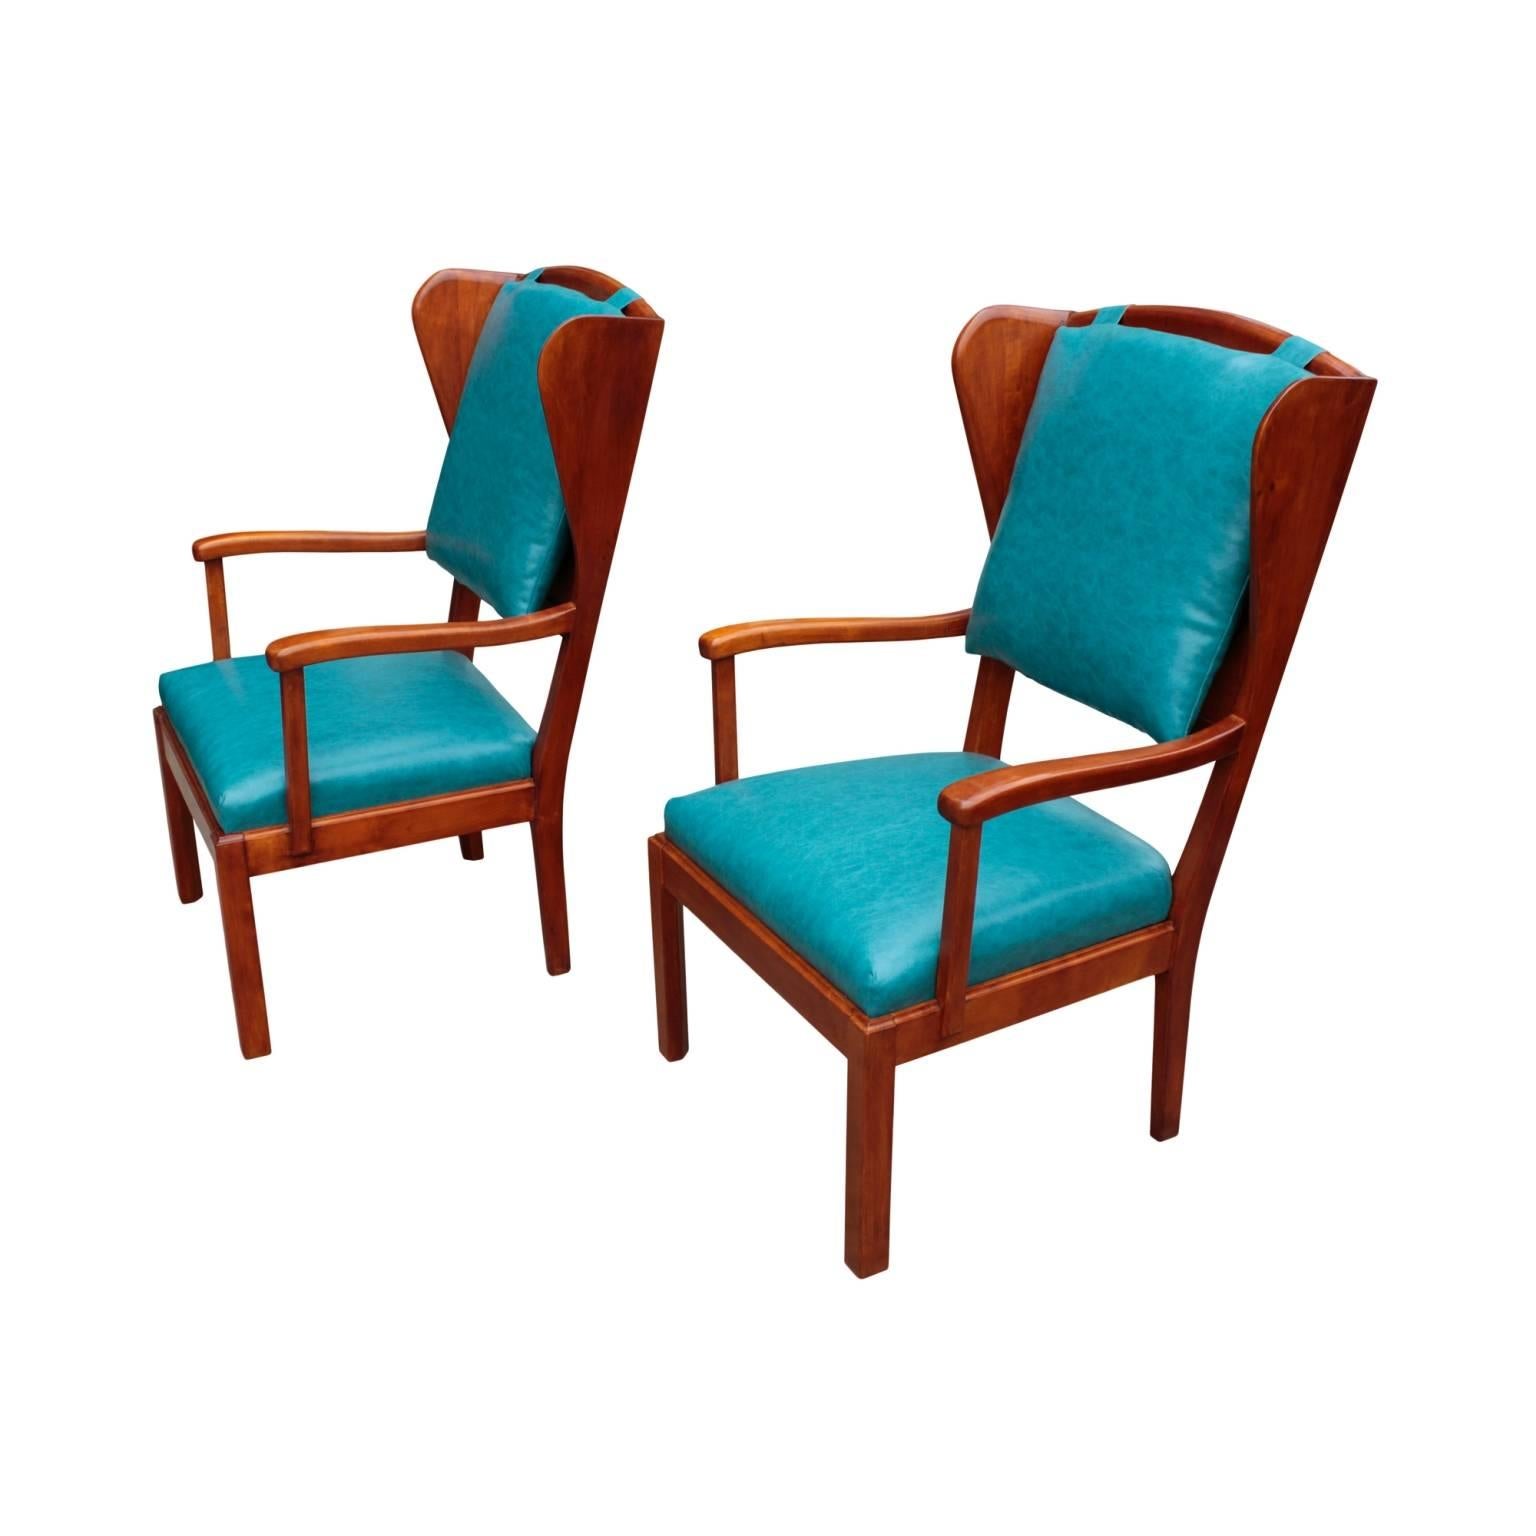 Unusual and comfortable pair of Swedish Functionalism (1930's) wingback armchairs. Padded seats and removable pillows on birch panel backrests recovered with turquoise colored composition leather. Shaped arms and legs in flame birch.